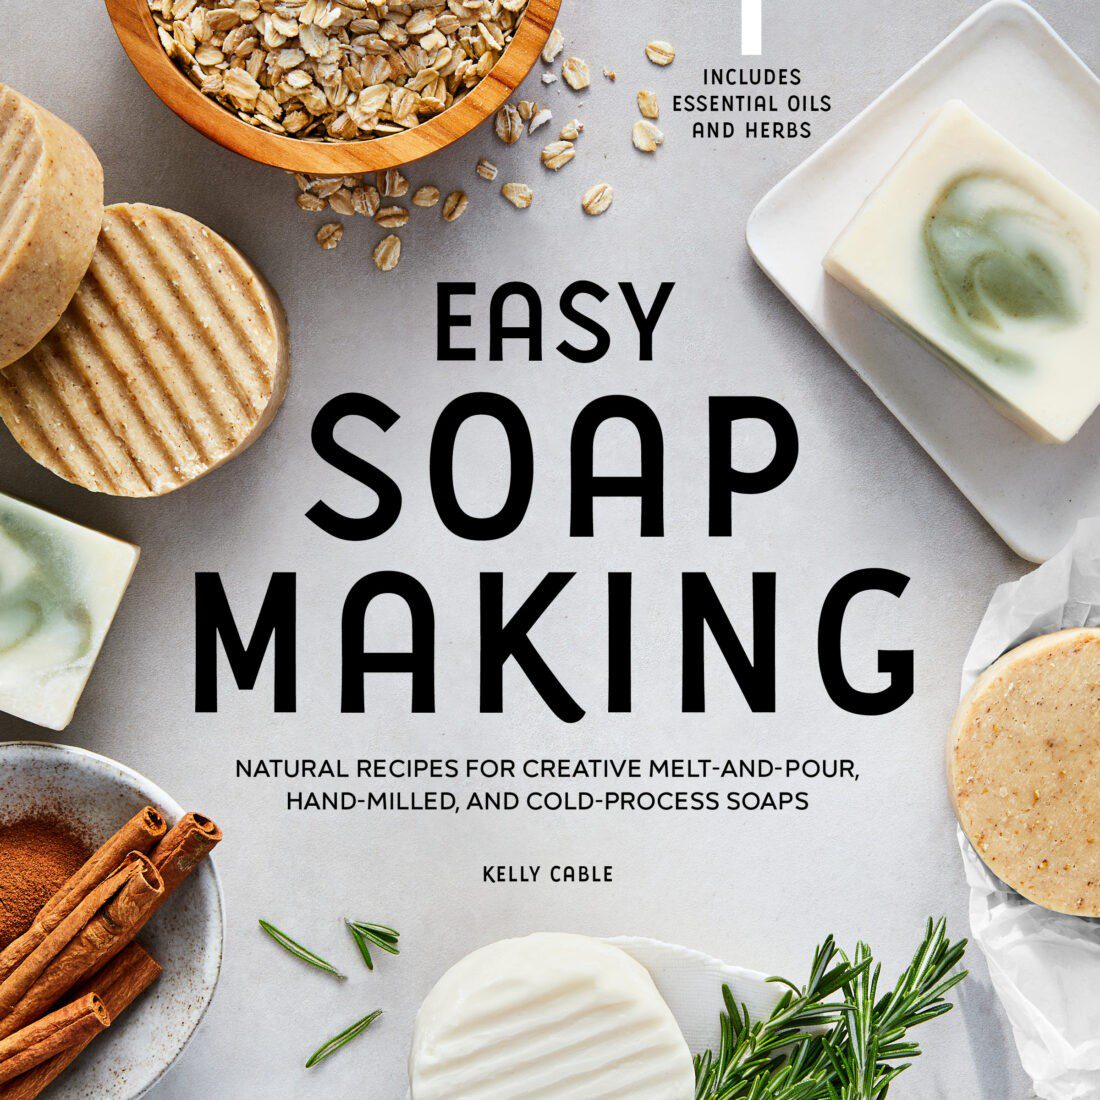 How To Make Handmade Soap; Step 1. Soapmaking Ingredients